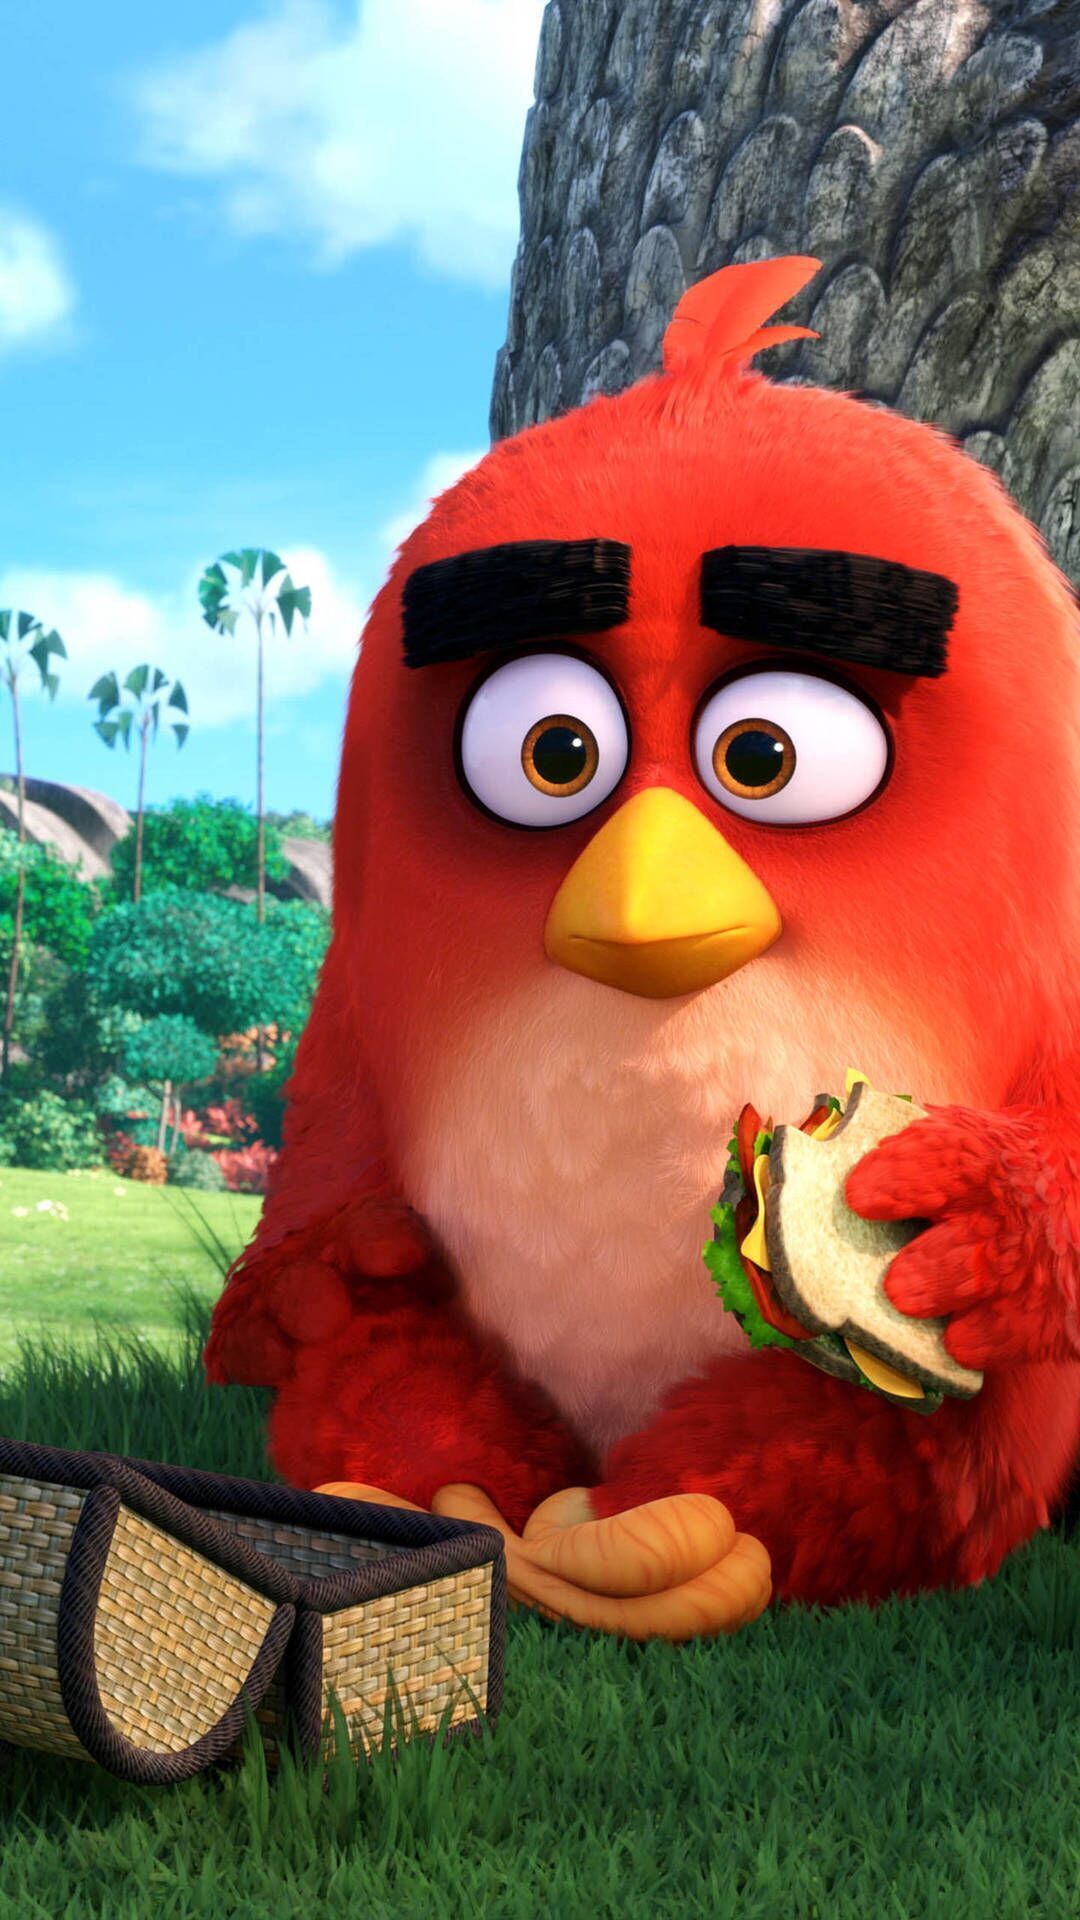 Angry Bird. Angry bird picture, Angry birds movie, Angry birds